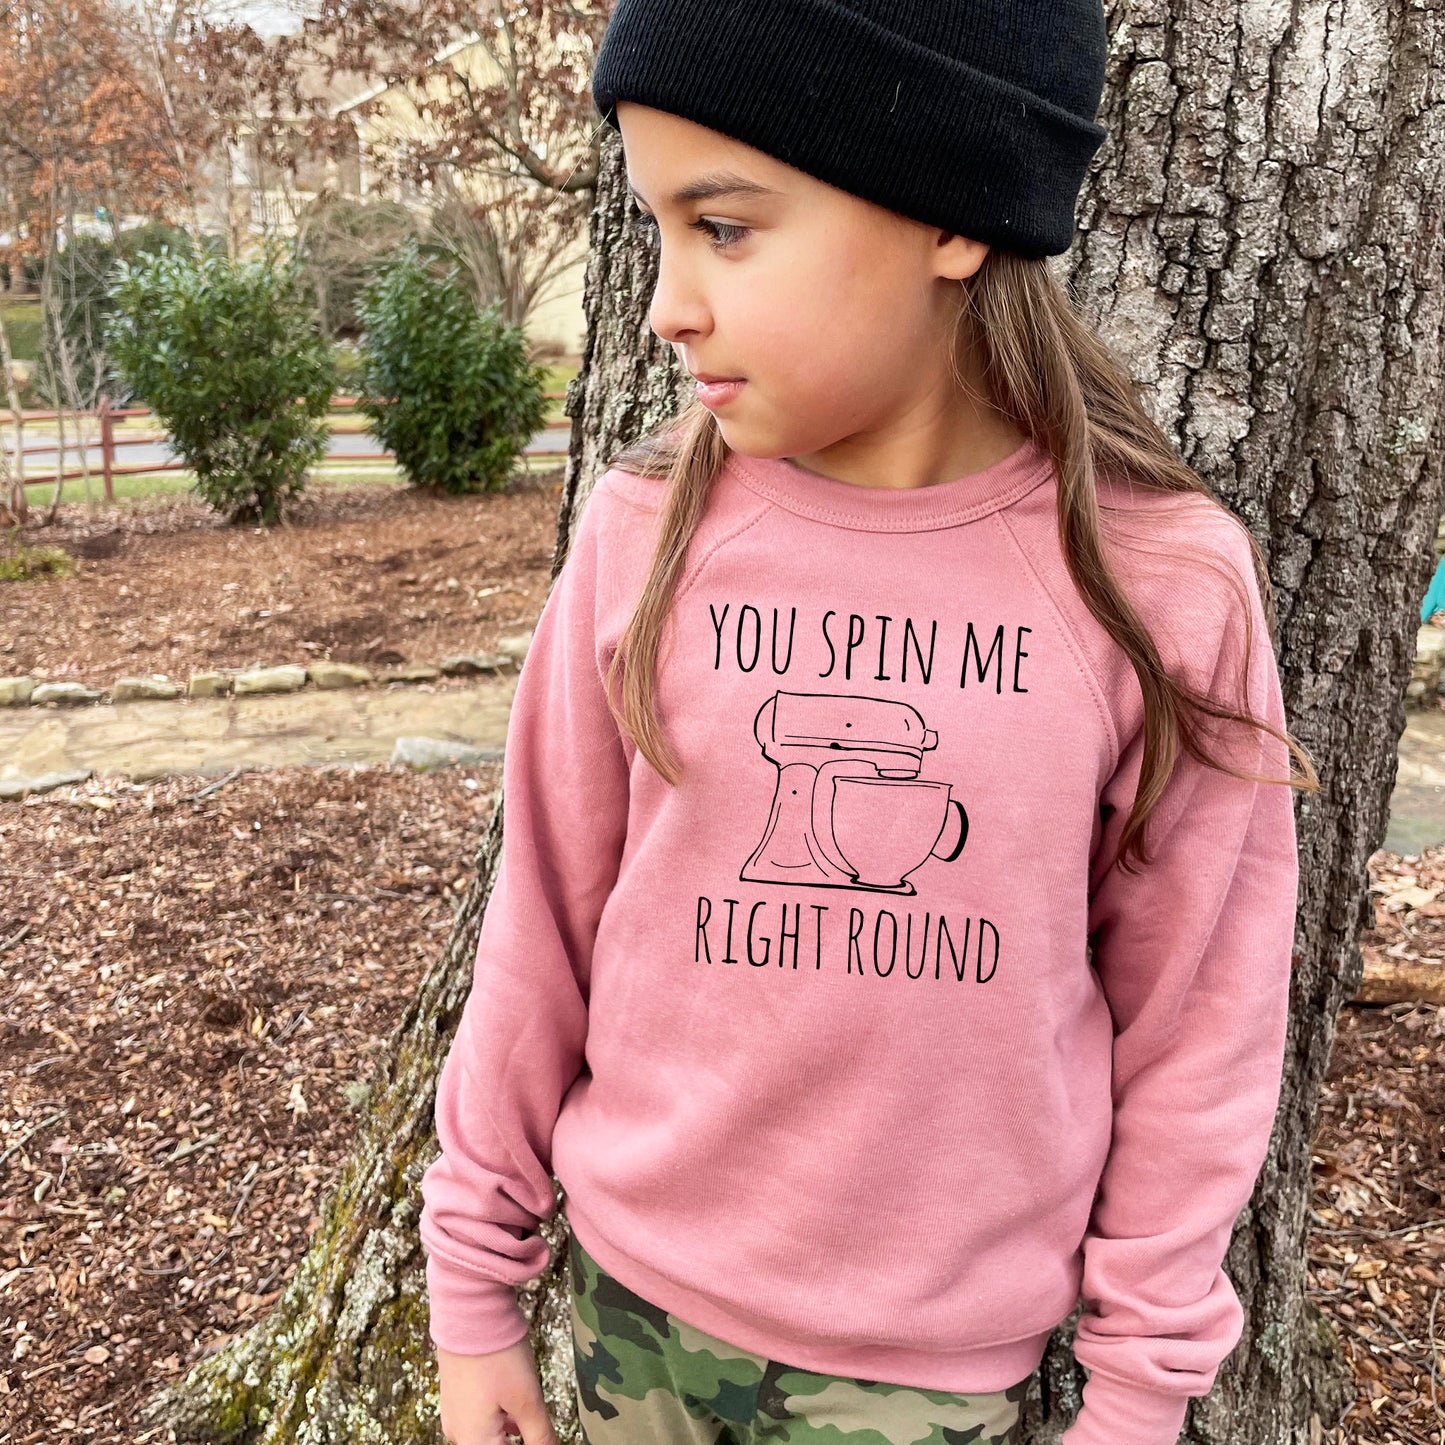 You Spin Me Right Round (Mixer) - Kid's Sweatshirt - Heather Gray or Mauve